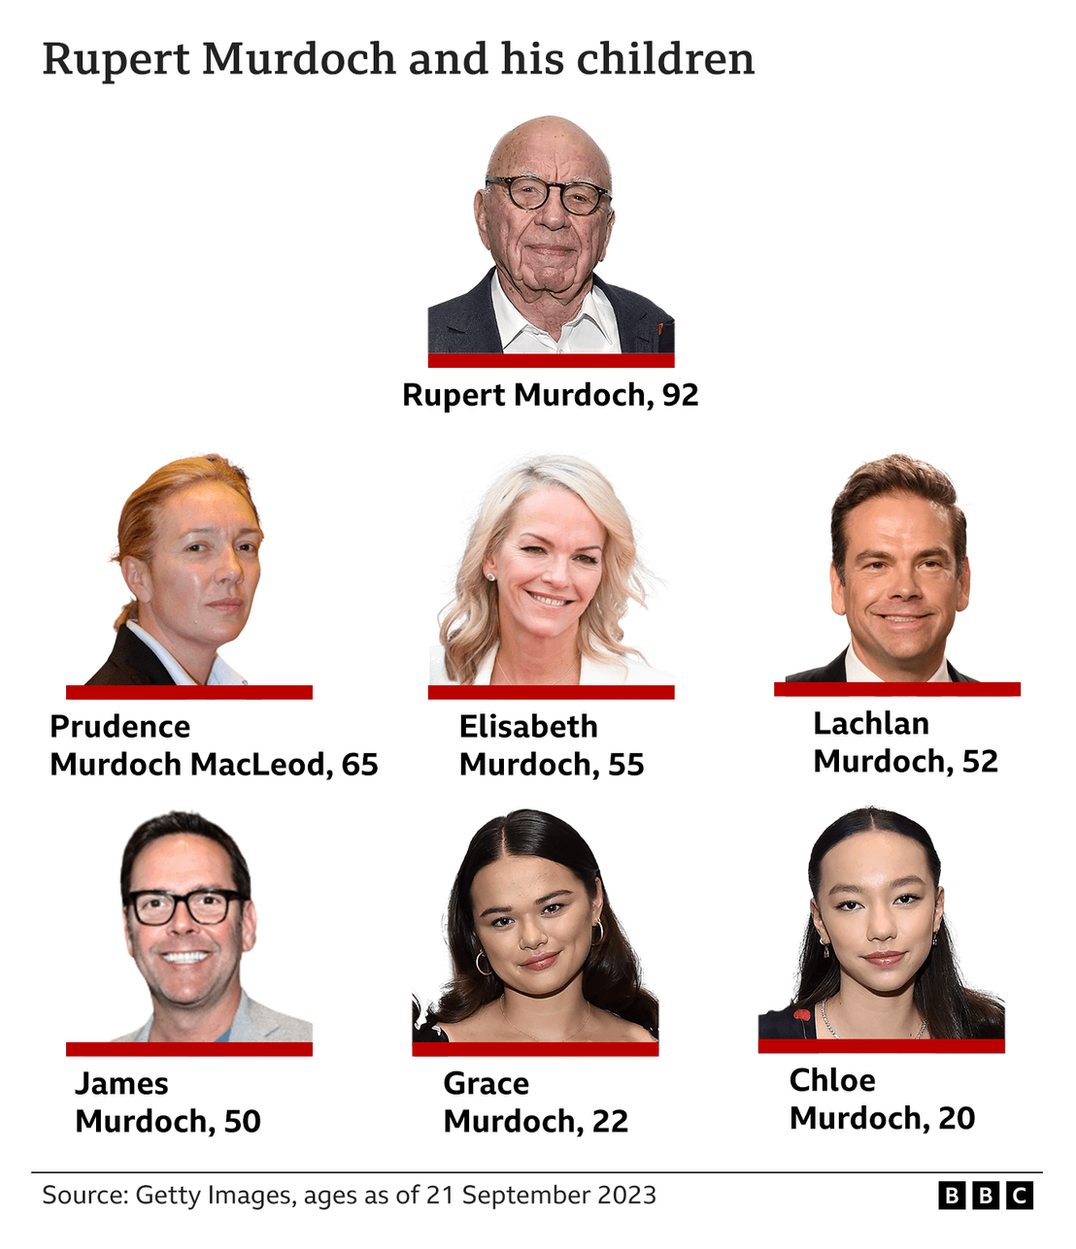 A family tree of Rupert Murdoch and his children